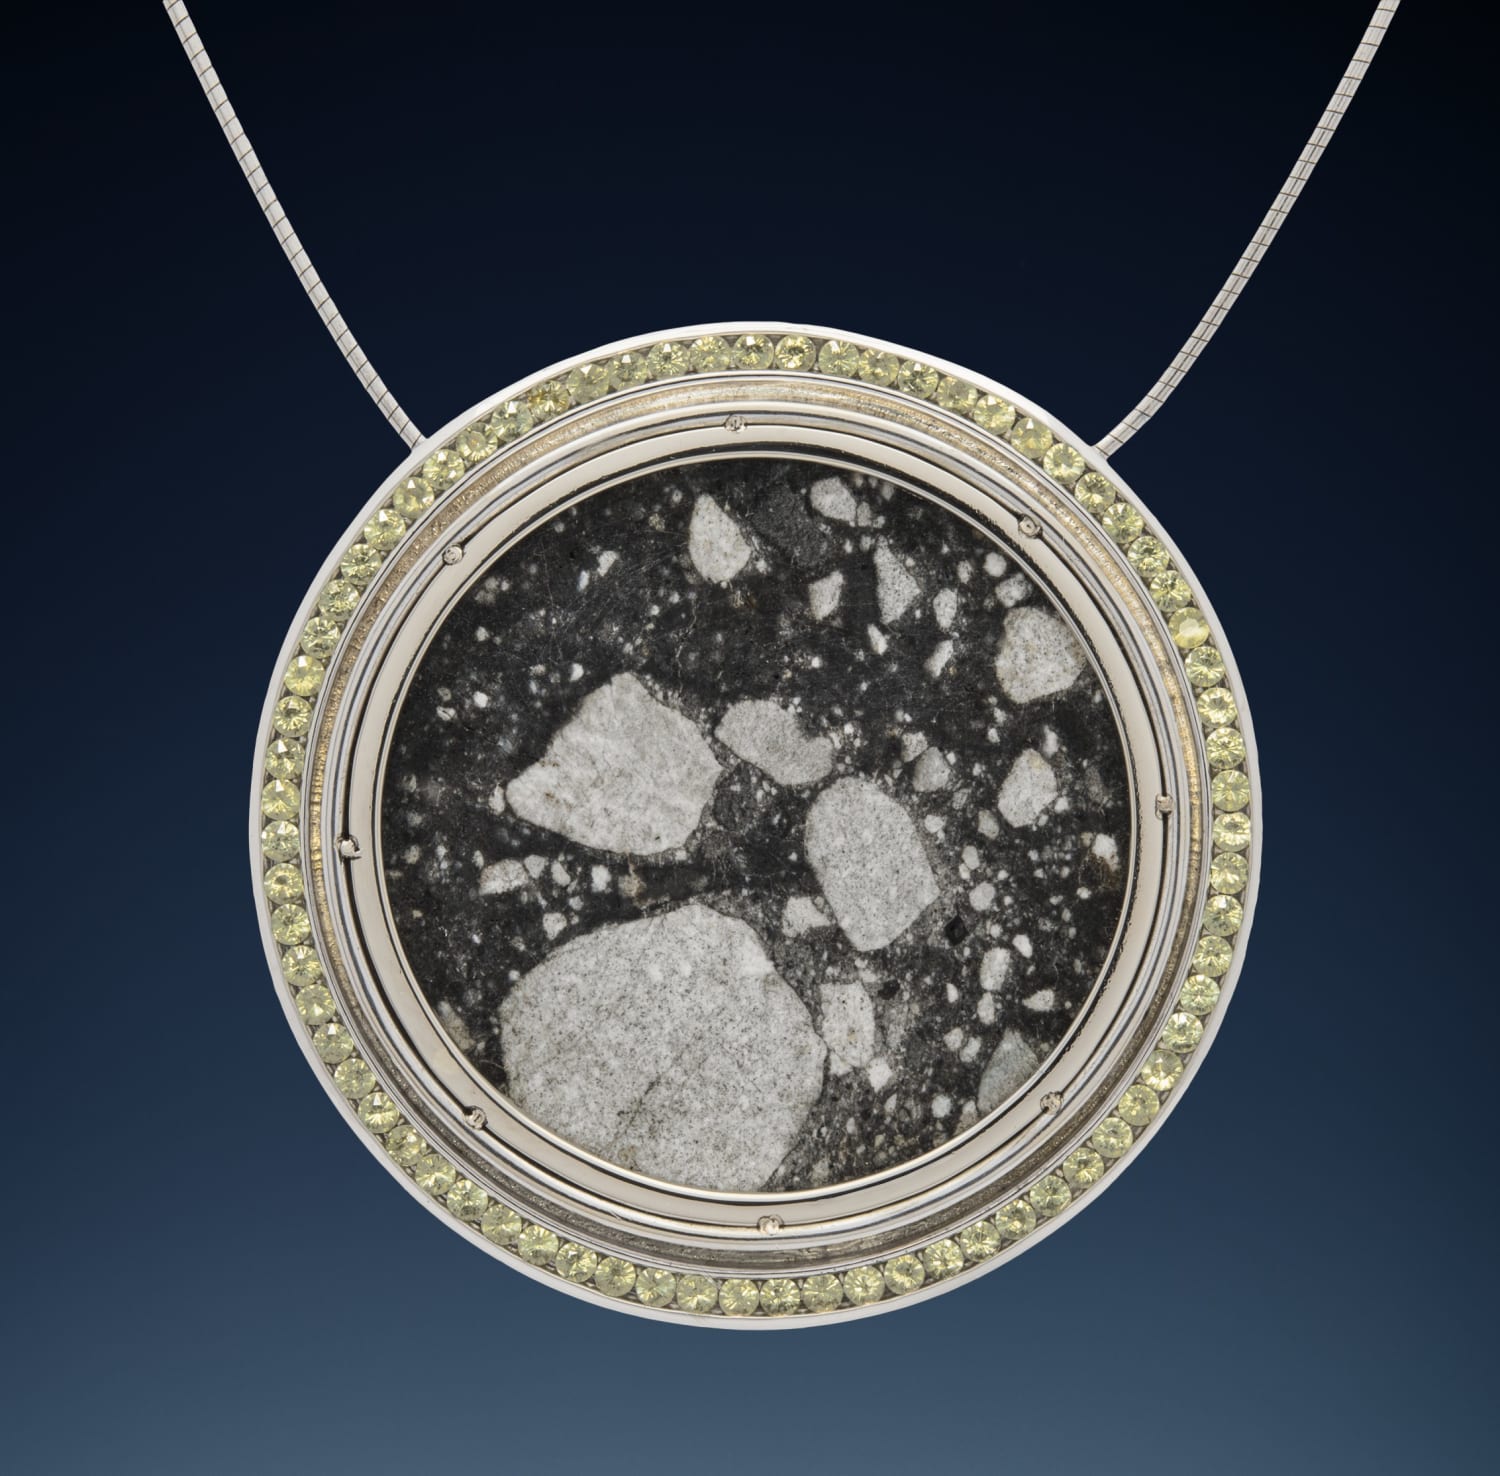 Lunar Pendant with 71 crystals of extraterrestrial peridot extracted from the Seymchan meteorite shower in Siberia encompassing a circular disc of a sample of the Moon cut from a specimen of lunar meteorite NWA 12691, set in 14K white gold.